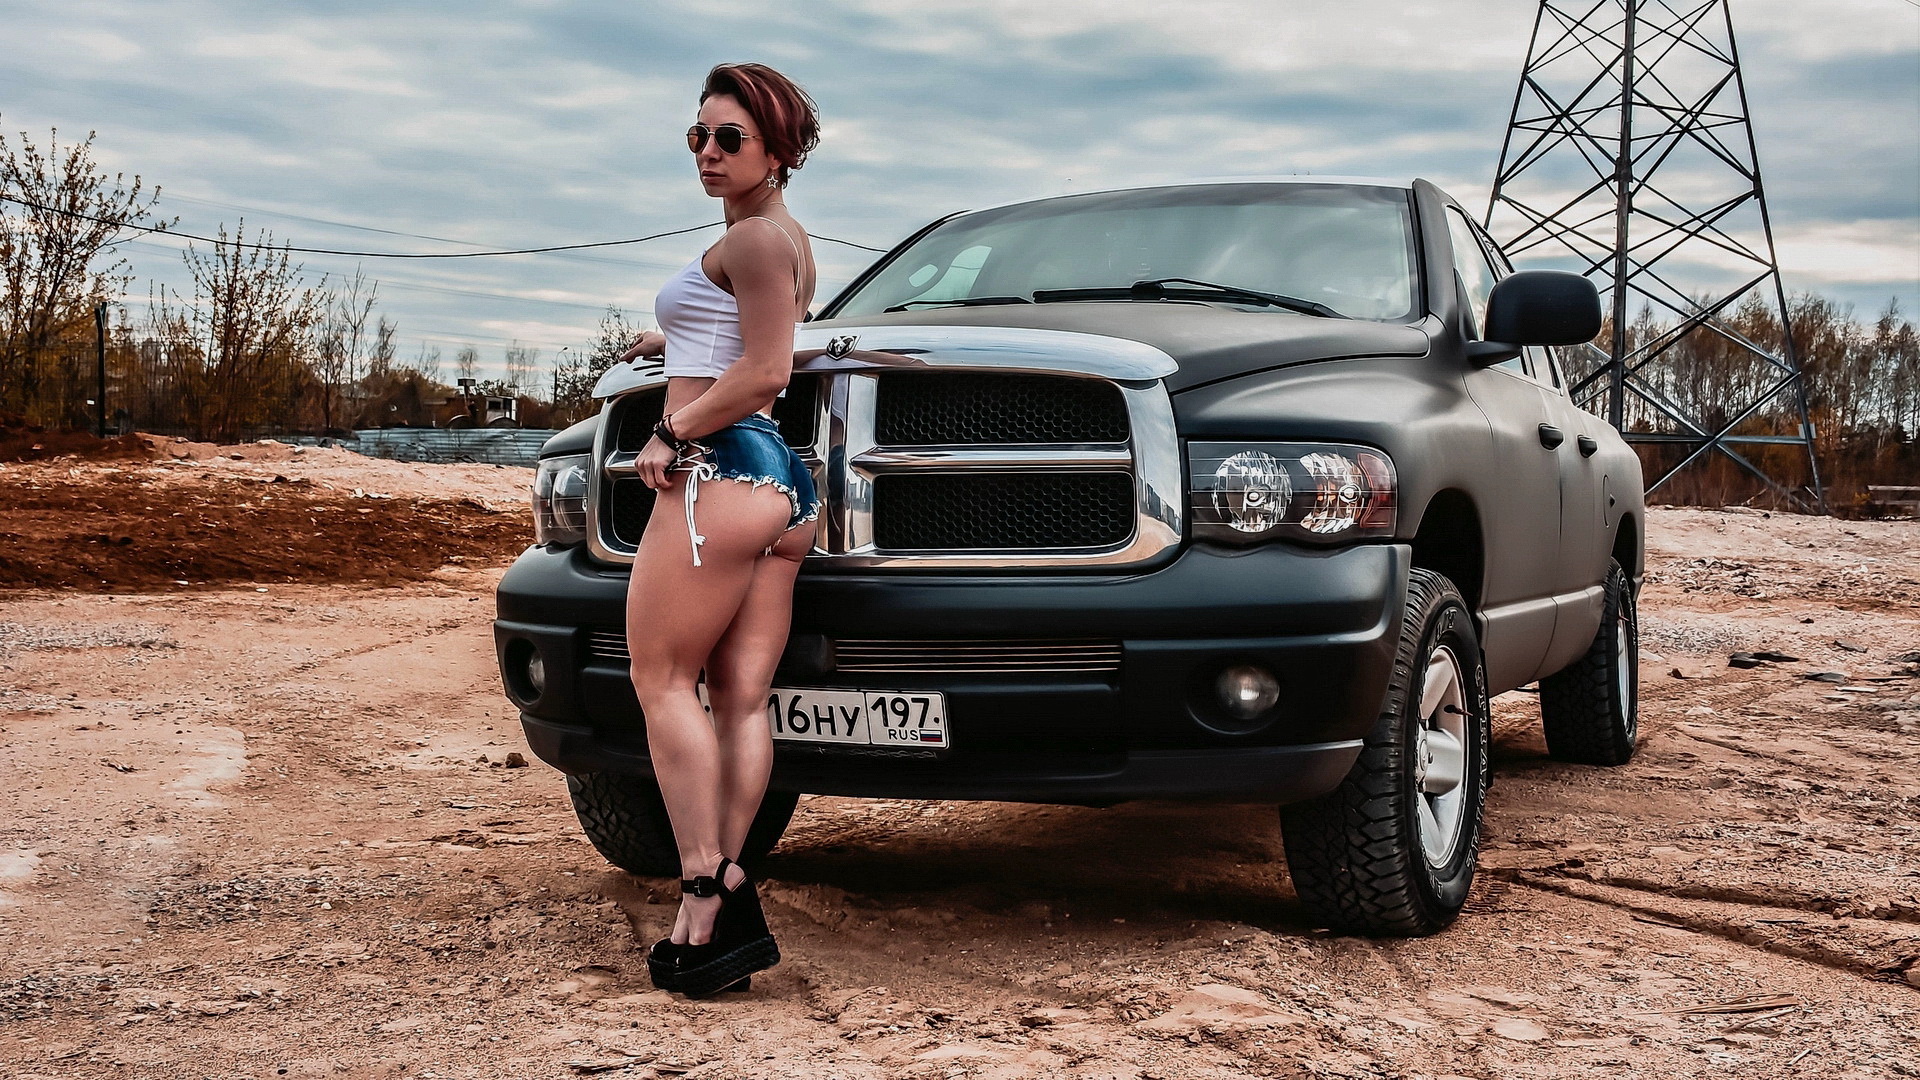 Photo of a girl and a car